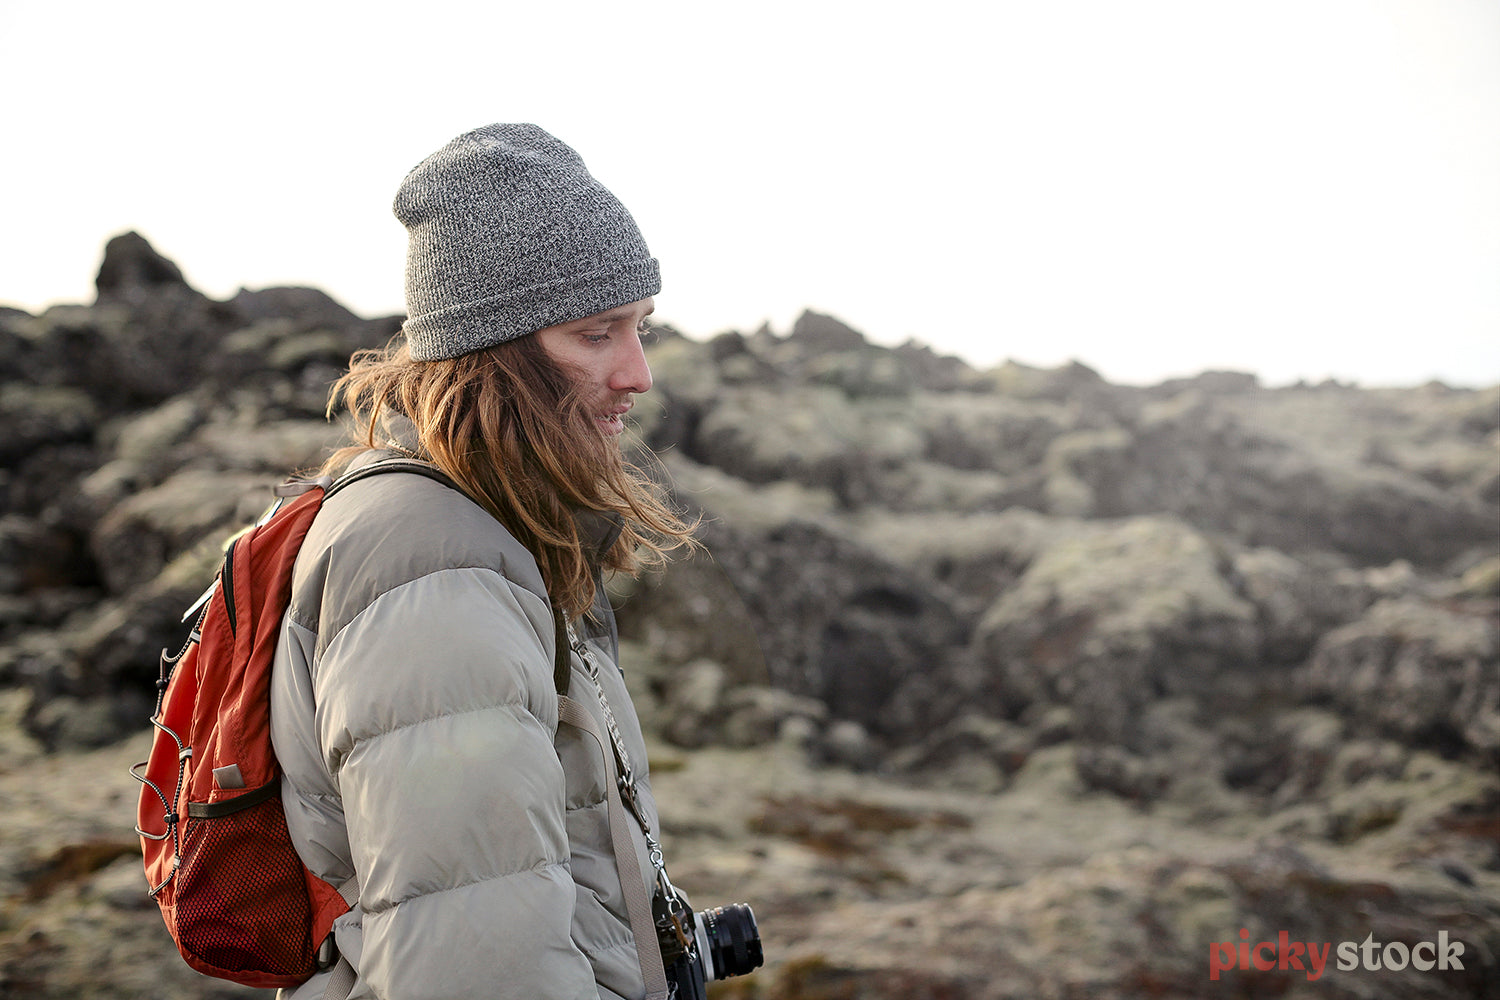 Young male with long hairr and beanie, wears a camera around neck while out exploring on a cold day. 